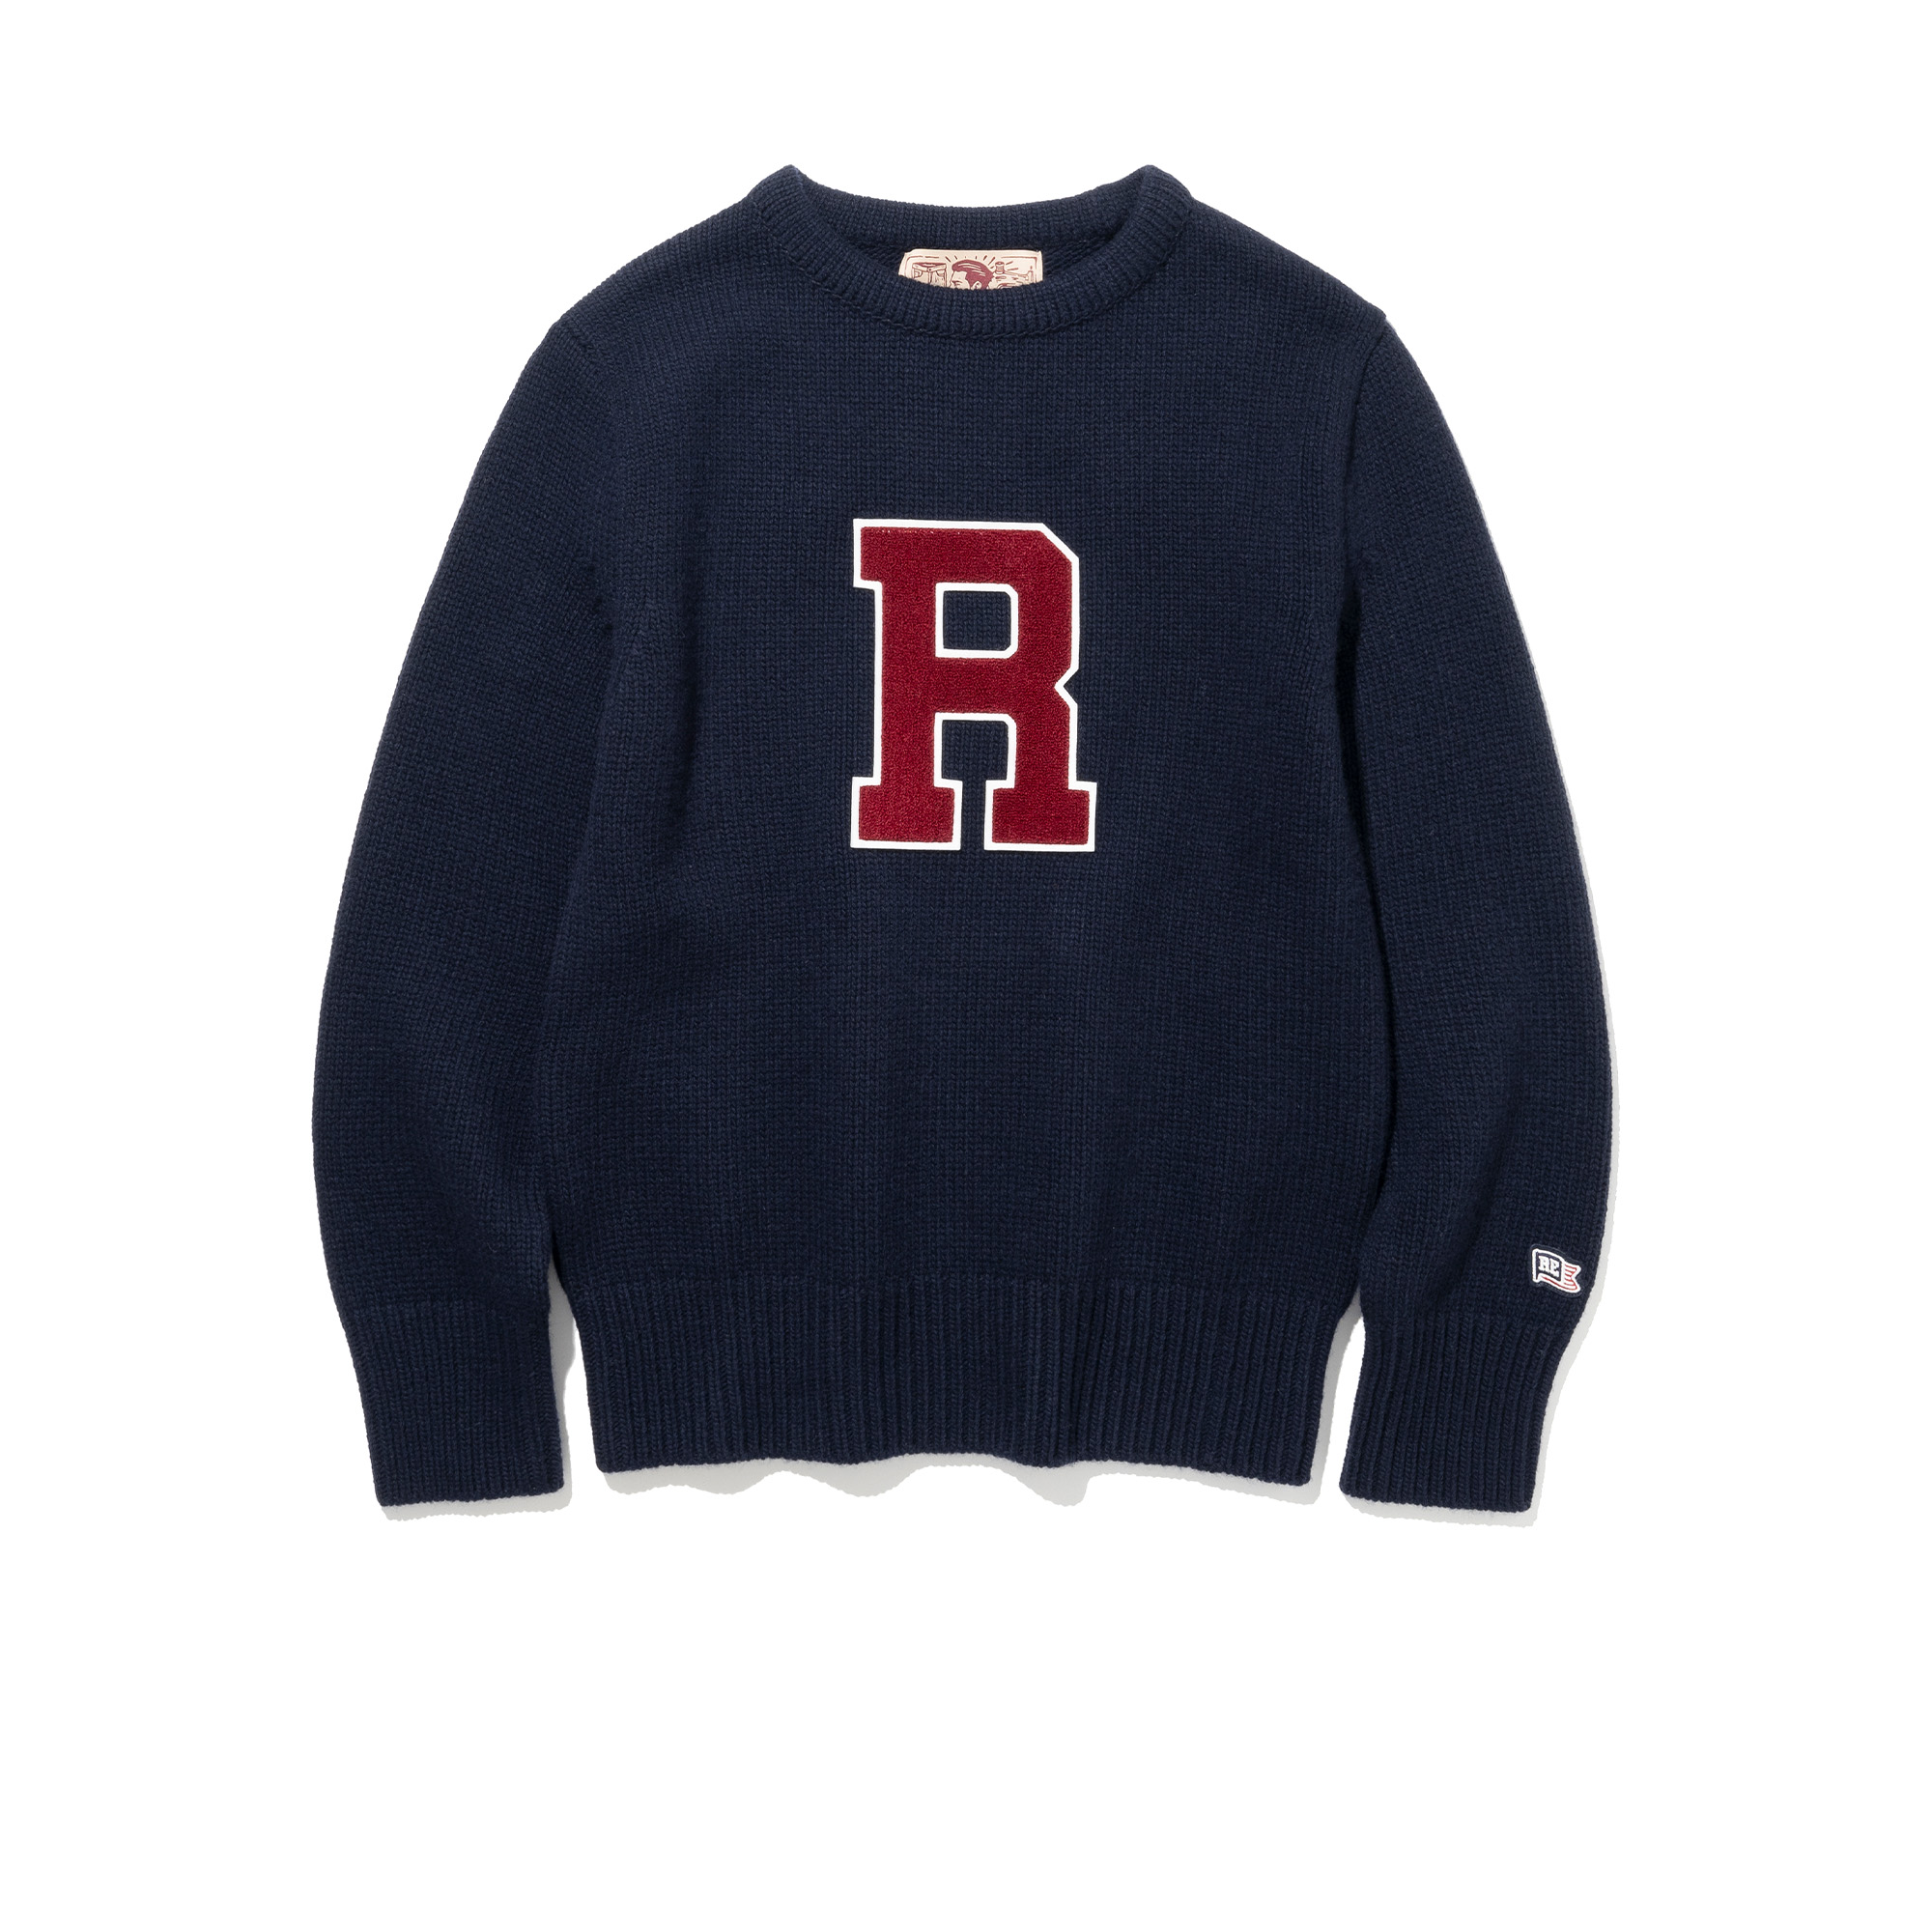 Boat Neck Letterman Sweater [Navy]리넥츠